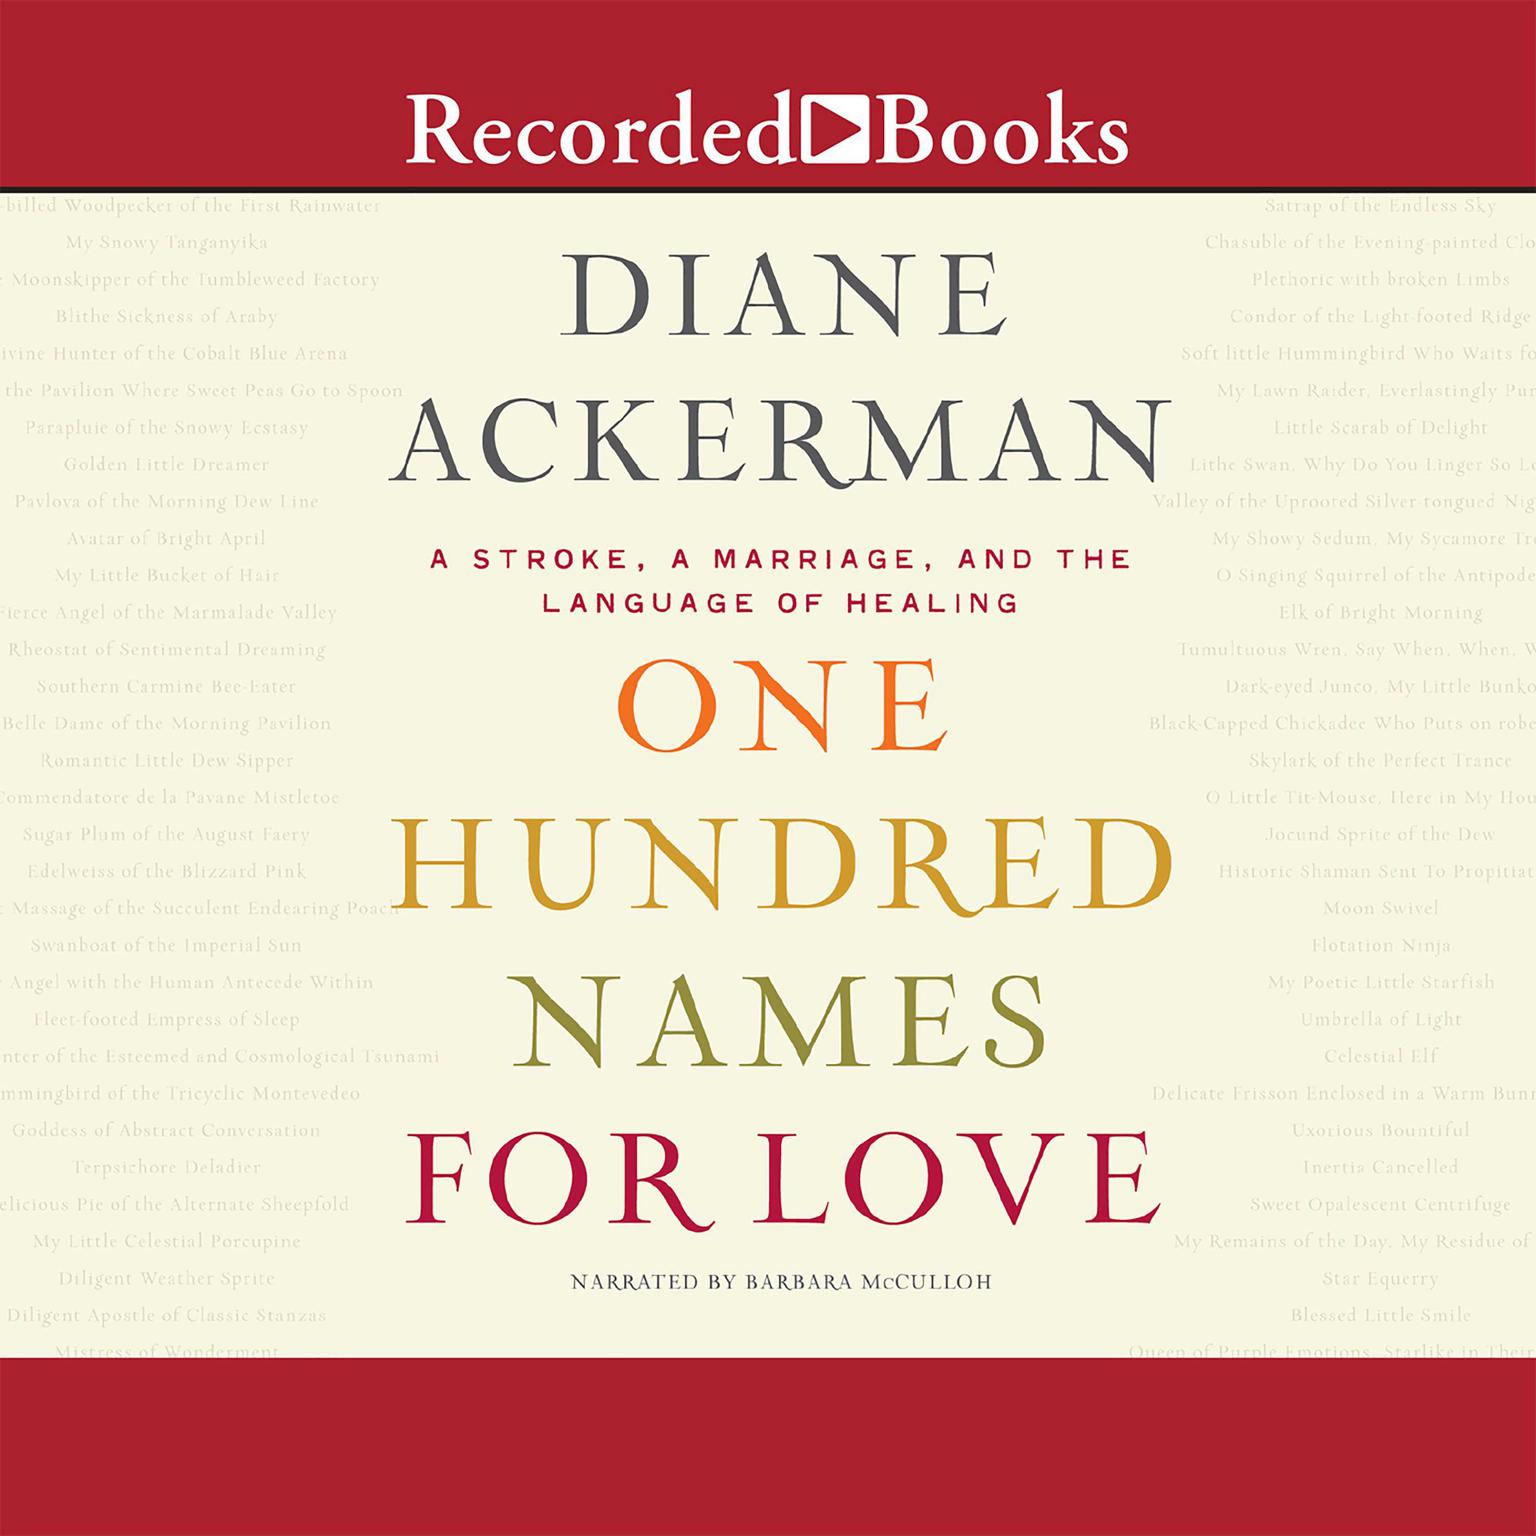 One Hundred Names for Love: A Stroke, A Marriage, and the Language of Healing Audiobook, by Diane Ackerman